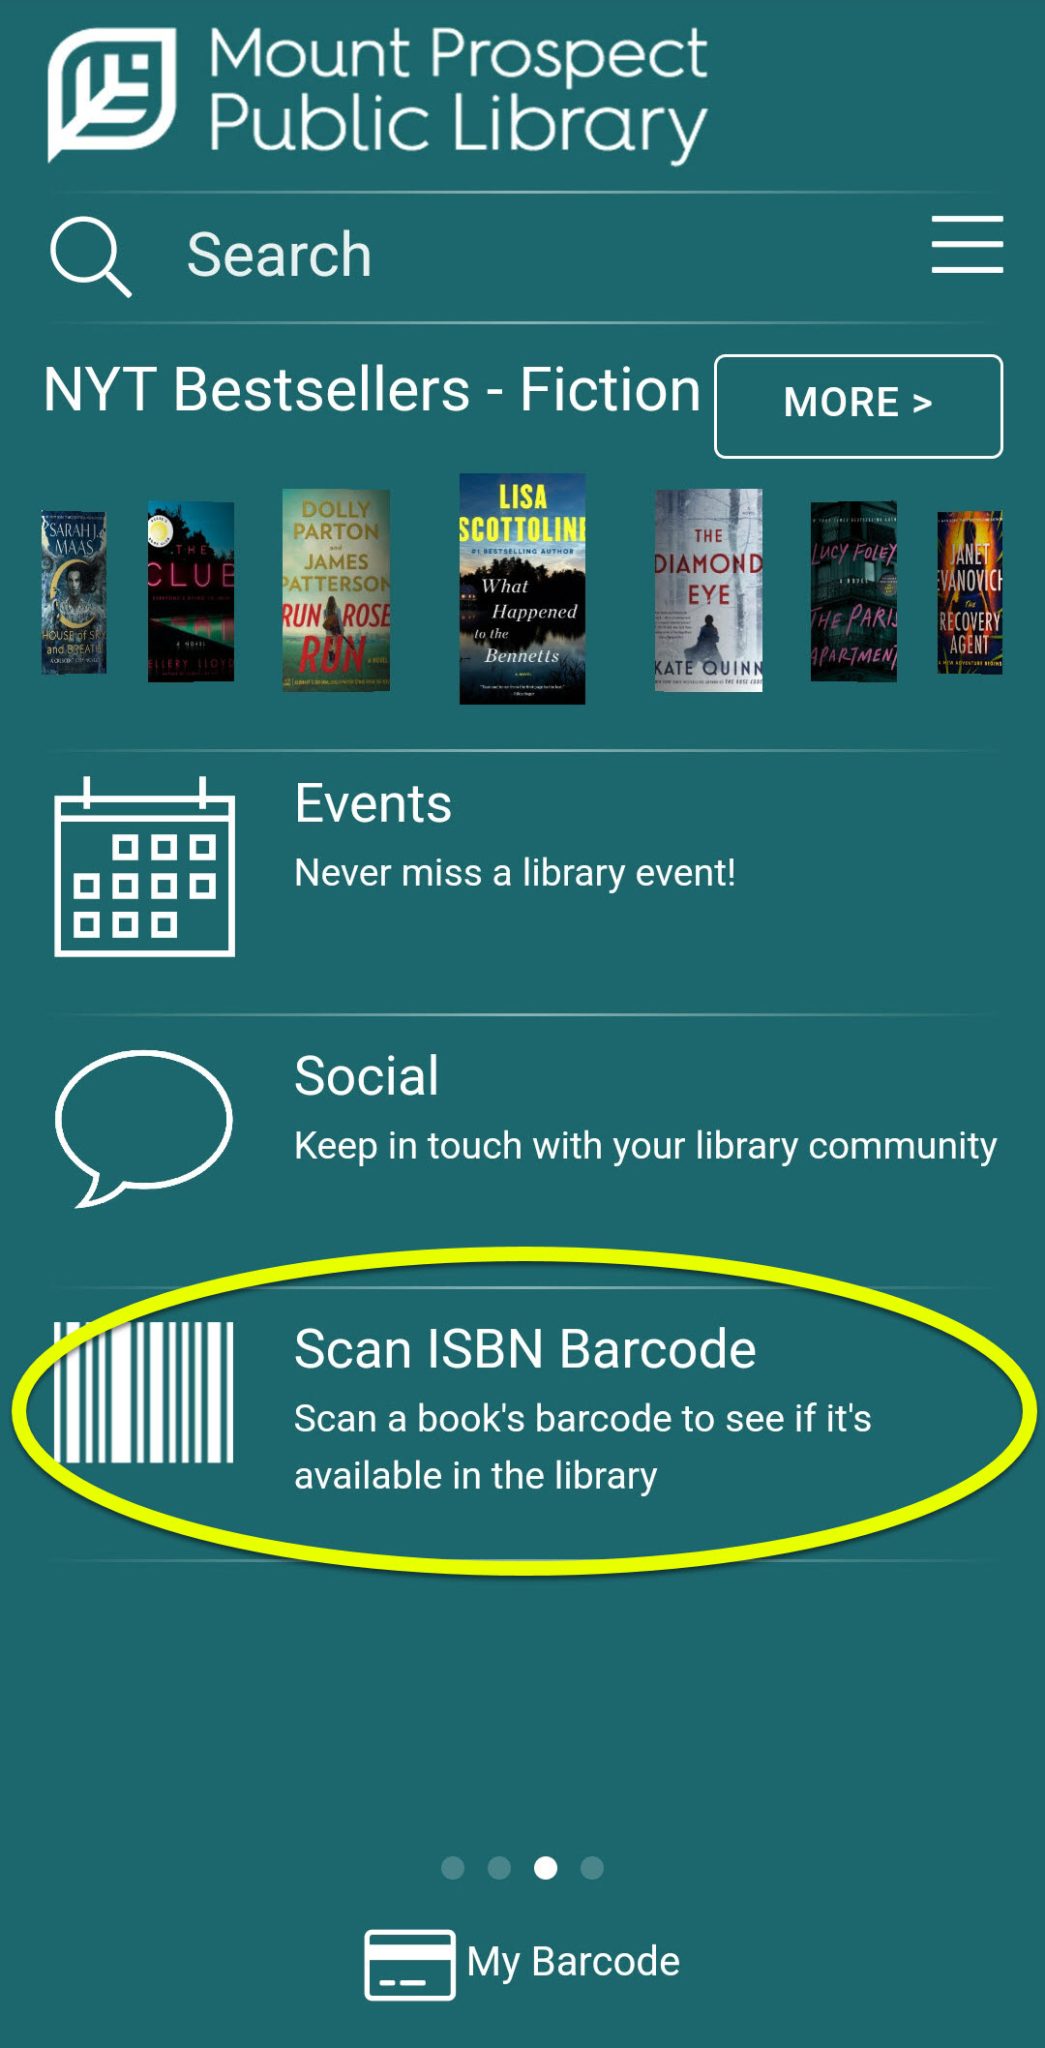 scan ISBN barcode to see if it's available in the library